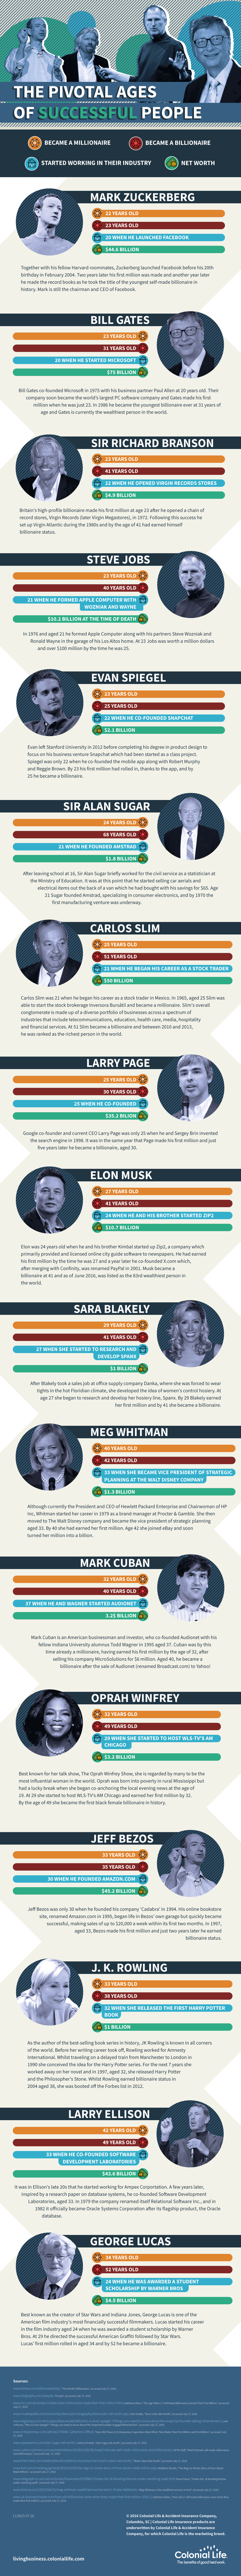 The Pivotal Ages Of Successful People - #infographic